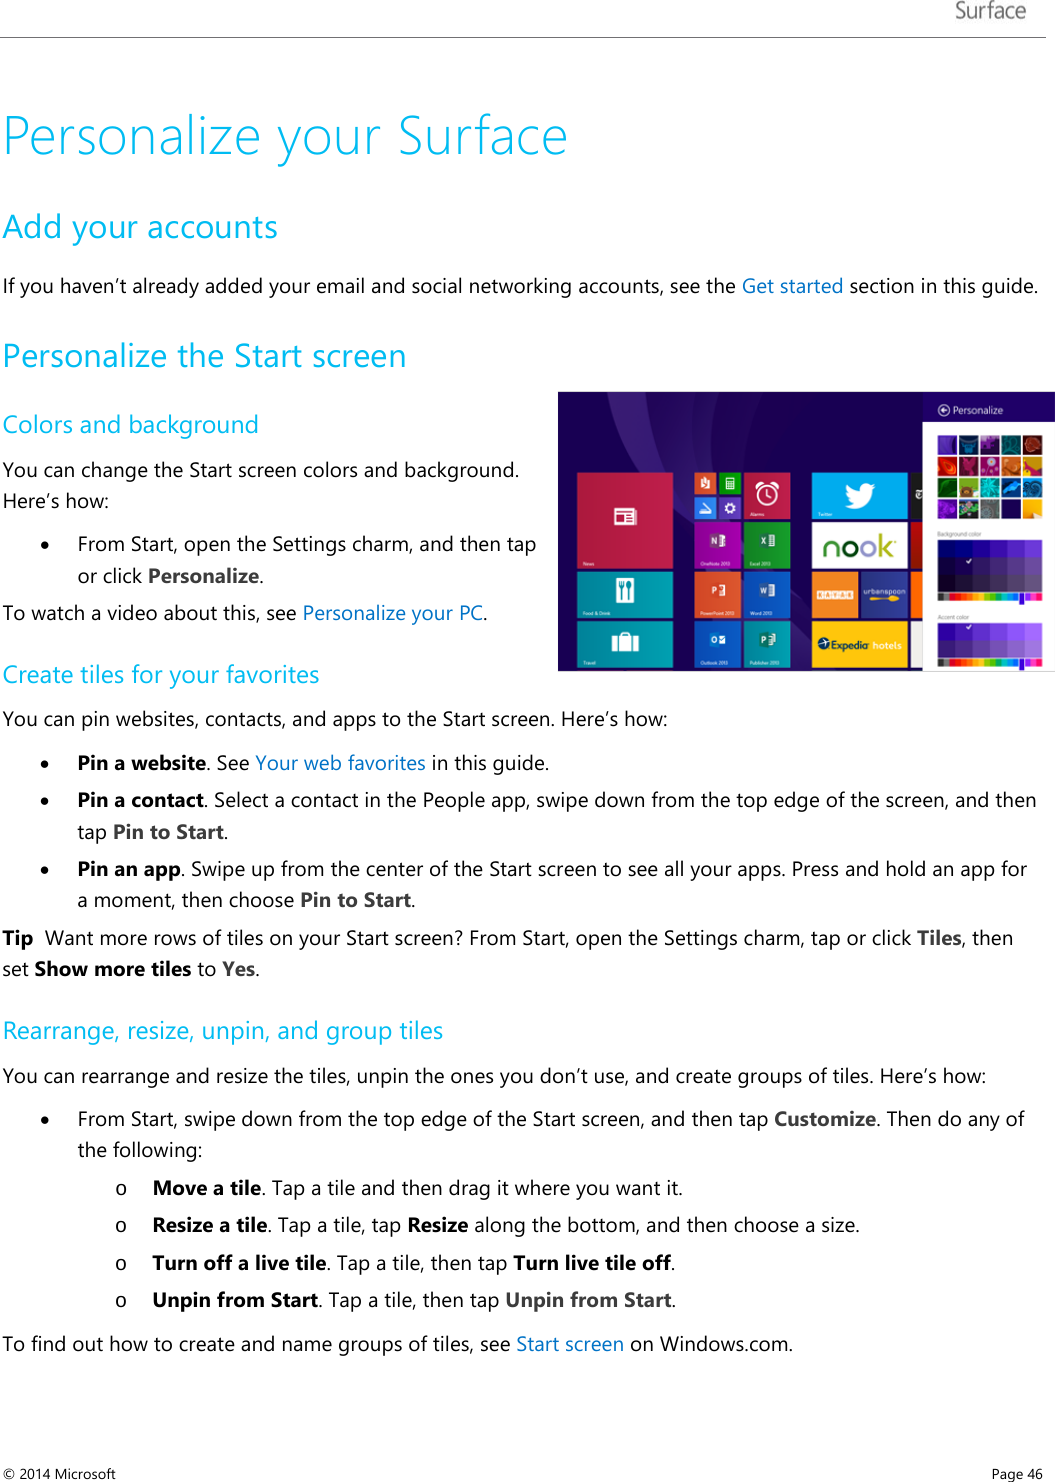   Personalize your Surface Add your accounts If you haven’t already added your email and social networking accounts, see the Get started section in this guide. Personalize the Start screen  Colors and background You can change the Start screen colors and background. Here’s how: • From Start, open the Settings charm, and then tap or click Personalize. To watch a video about this, see Personalize your PC.  Create tiles for your favorites You can pin websites, contacts, and apps to the Start screen. Here’s how: • Pin a website. See Your web favorites in this guide. • Pin a contact. Select a contact in the People app, swipe down from the top edge of the screen, and then tap Pin to Start.  • Pin an app. Swipe up from the center of the Start screen to see all your apps. Press and hold an app for a moment, then choose Pin to Start. Tip  Want more rows of tiles on your Start screen? From Start, open the Settings charm, tap or click Tiles, then set Show more tiles to Yes.  Rearrange, resize, unpin, and group tiles You can rearrange and resize the tiles, unpin the ones you don’t use, and create groups of tiles. Here’s how: • From Start, swipe down from the top edge of the Start screen, and then tap Customize. Then do any of the following: o Move a tile. Tap a tile and then drag it where you want it. o Resize a tile. Tap a tile, tap Resize along the bottom, and then choose a size. o Turn off a live tile. Tap a tile, then tap Turn live tile off.  o Unpin from Start. Tap a tile, then tap Unpin from Start. To find out how to create and name groups of tiles, see Start screen on Windows.com. © 2014 Microsoft     Page 46  